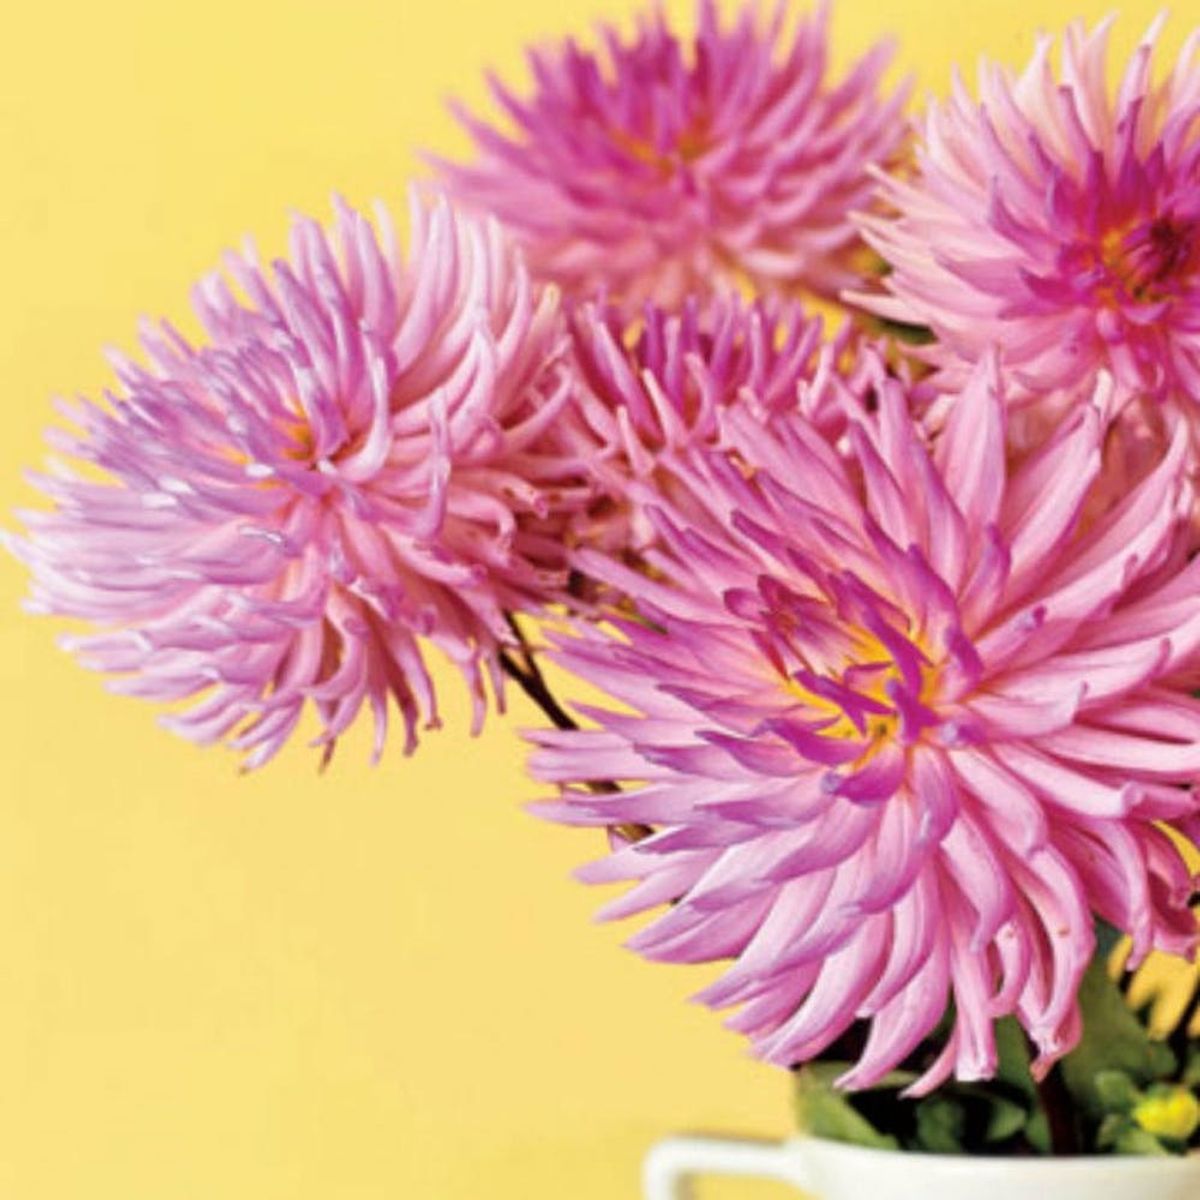 19 Gorgeous Blooms to Inspire Your Green Thumb